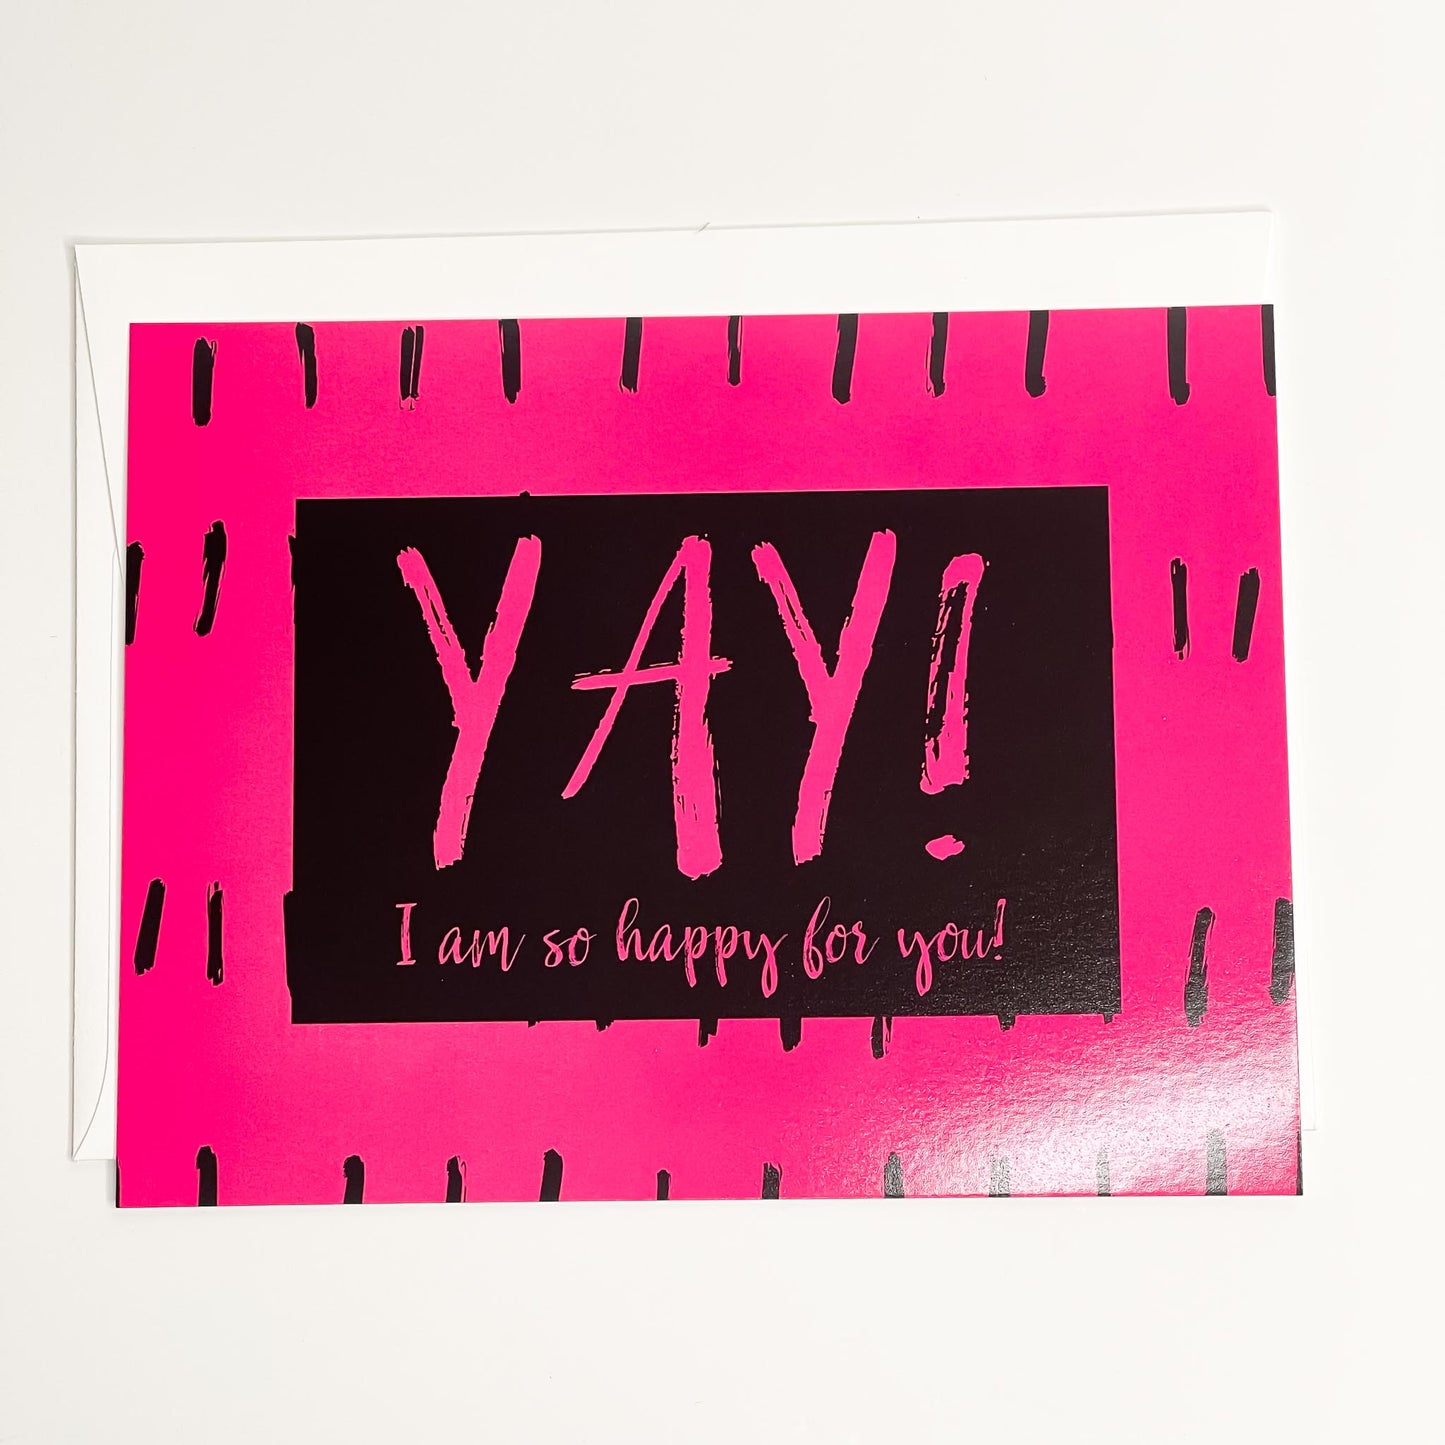 Yay, I'm so happy for you - Postcard